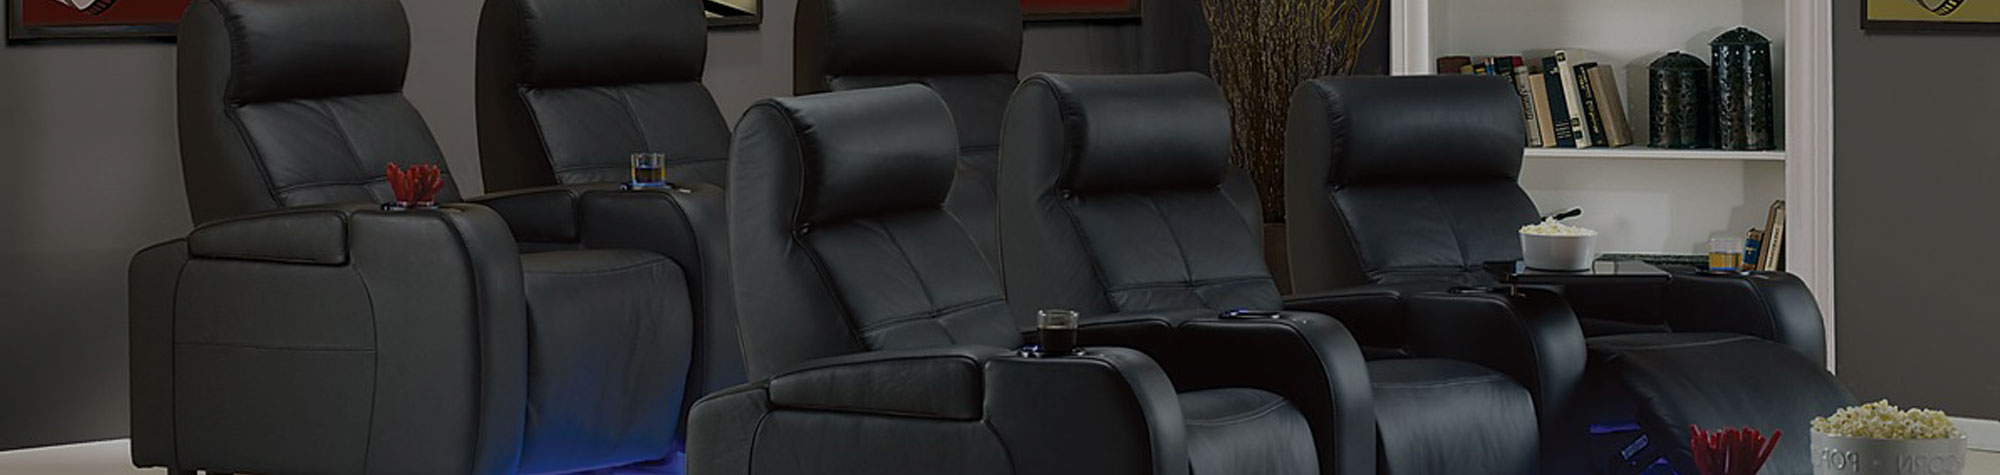 Palliser: The Leader in Contemporary Home Theater Furniture